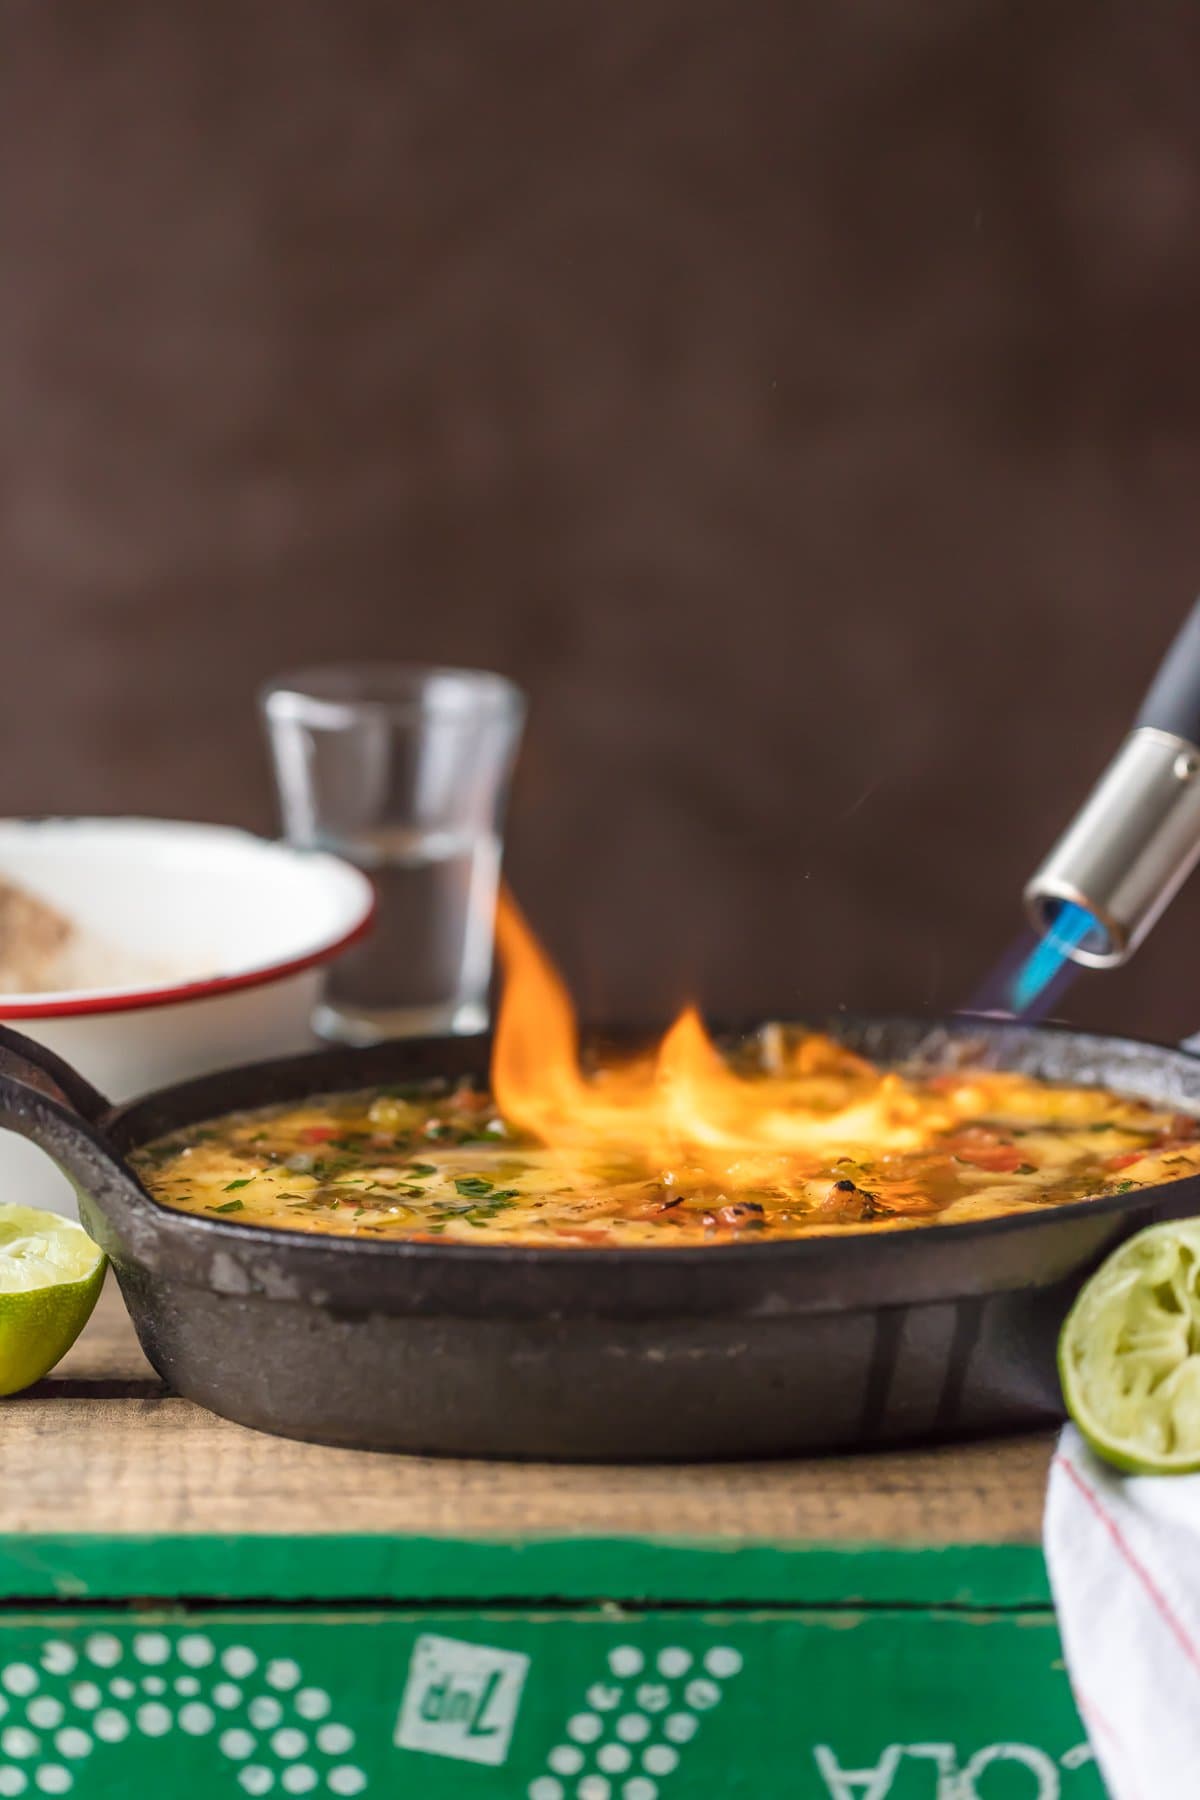 Lighting tequila lime queso on fire with a kitchen torch